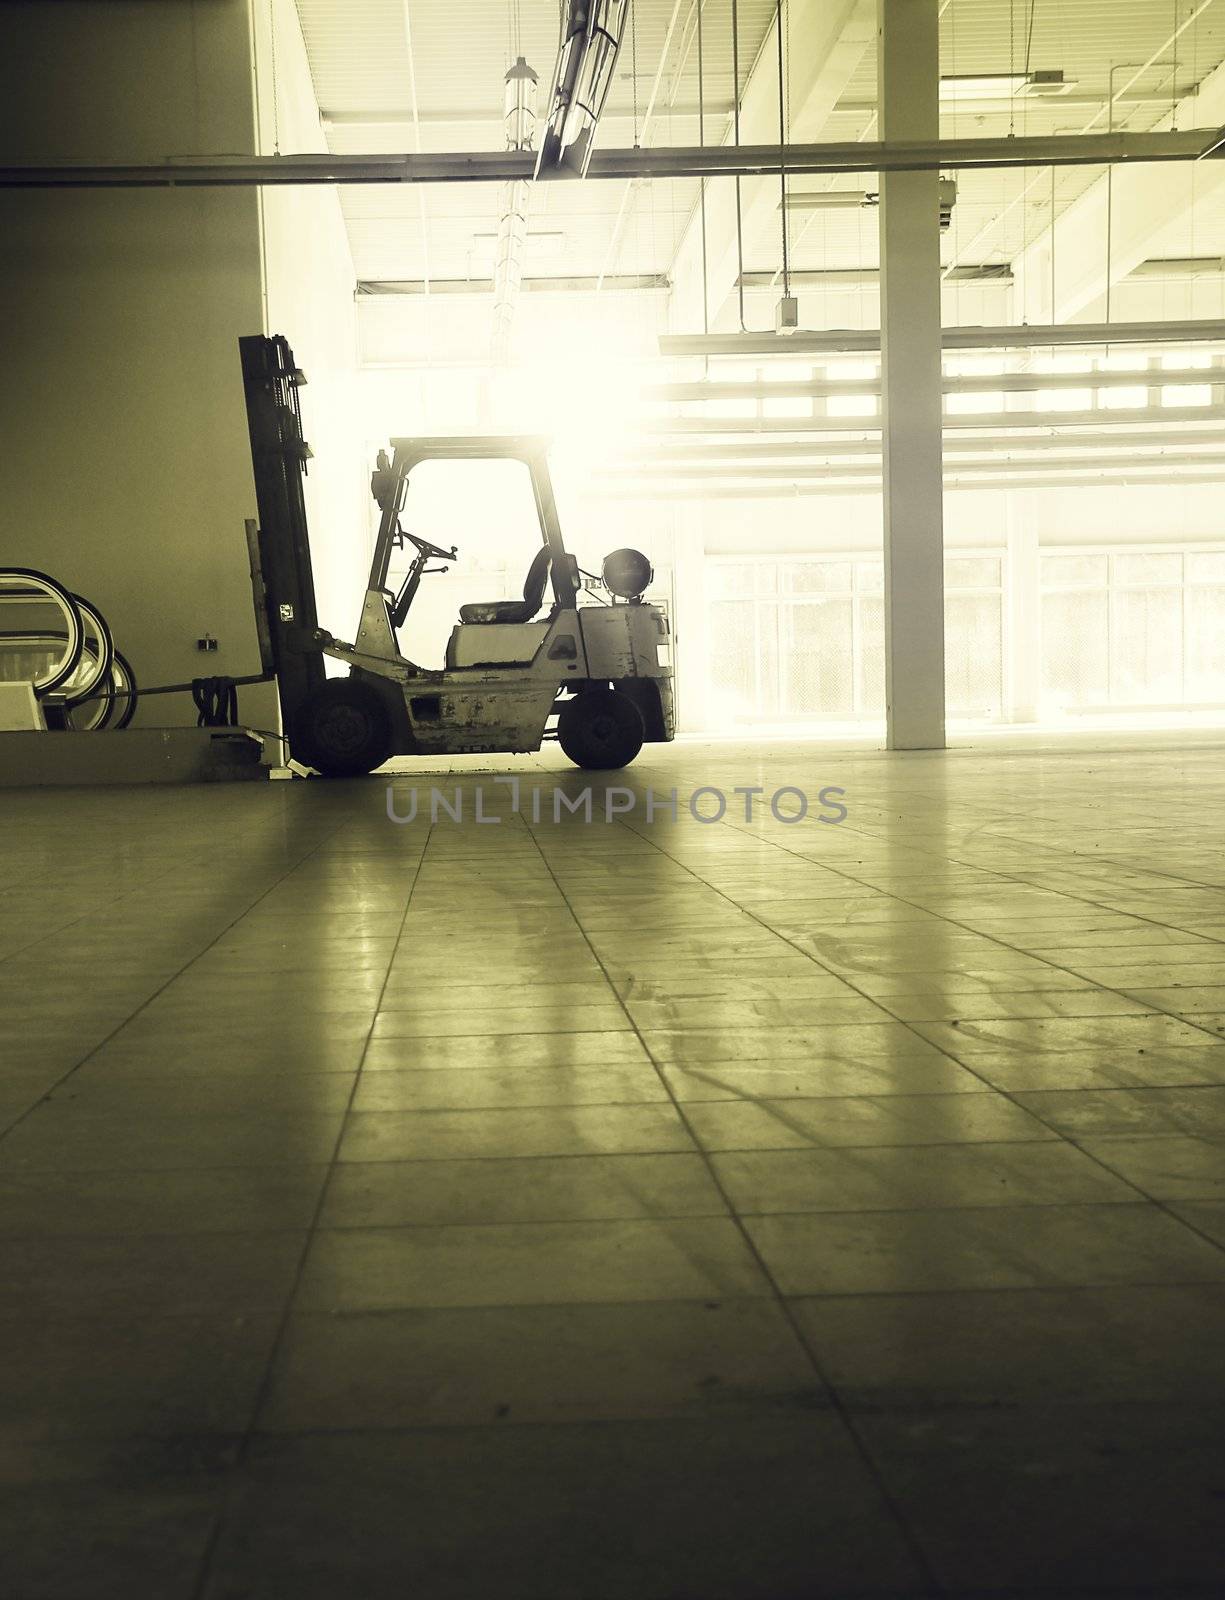 hall with forklift by Hasenonkel